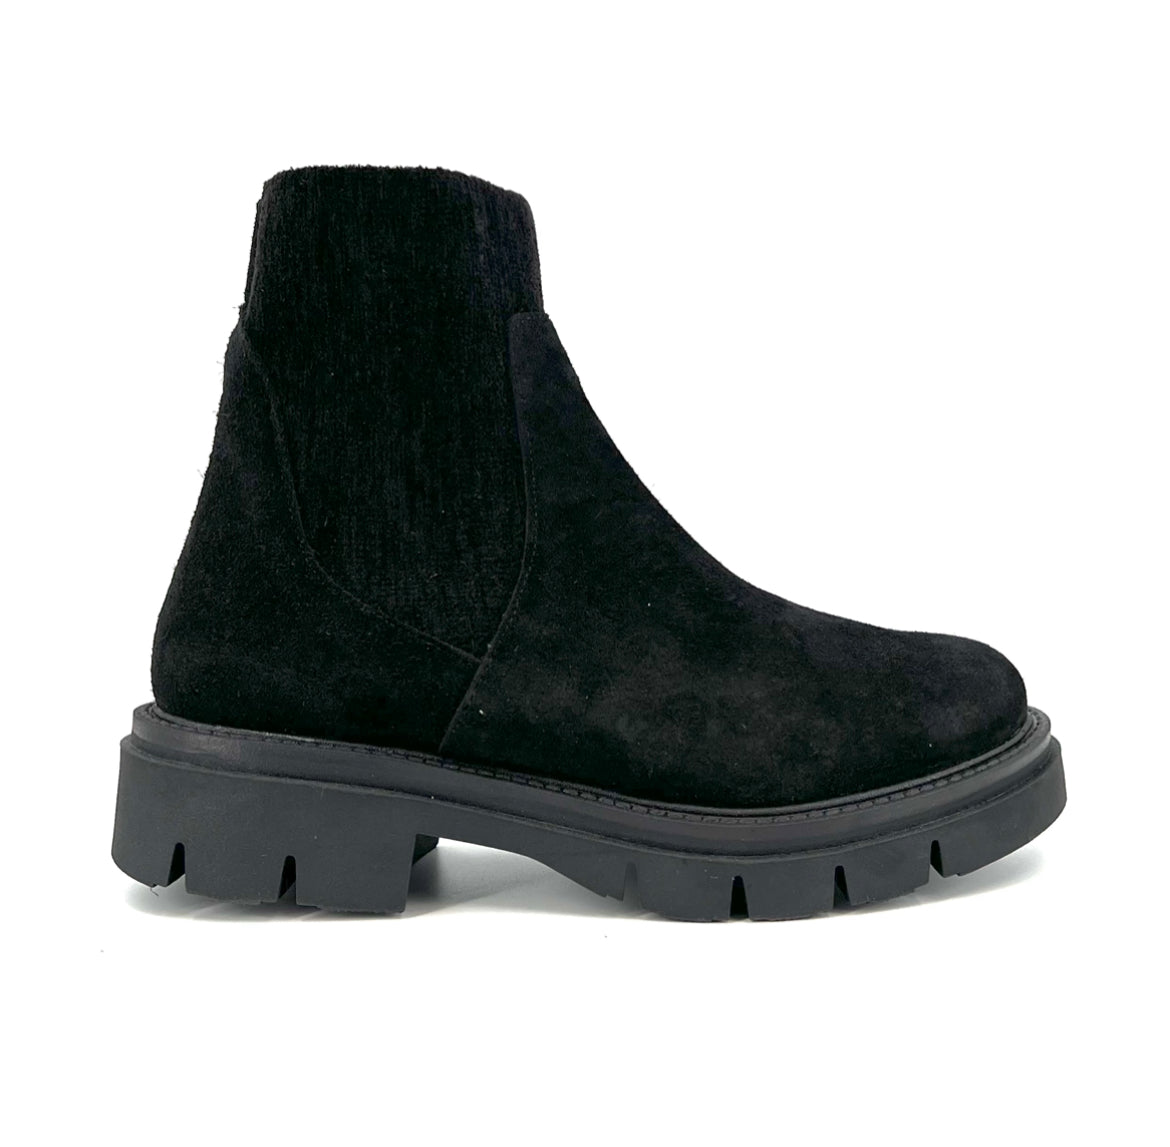 The Bootie with Chenille Knit Elastic Upper in Black